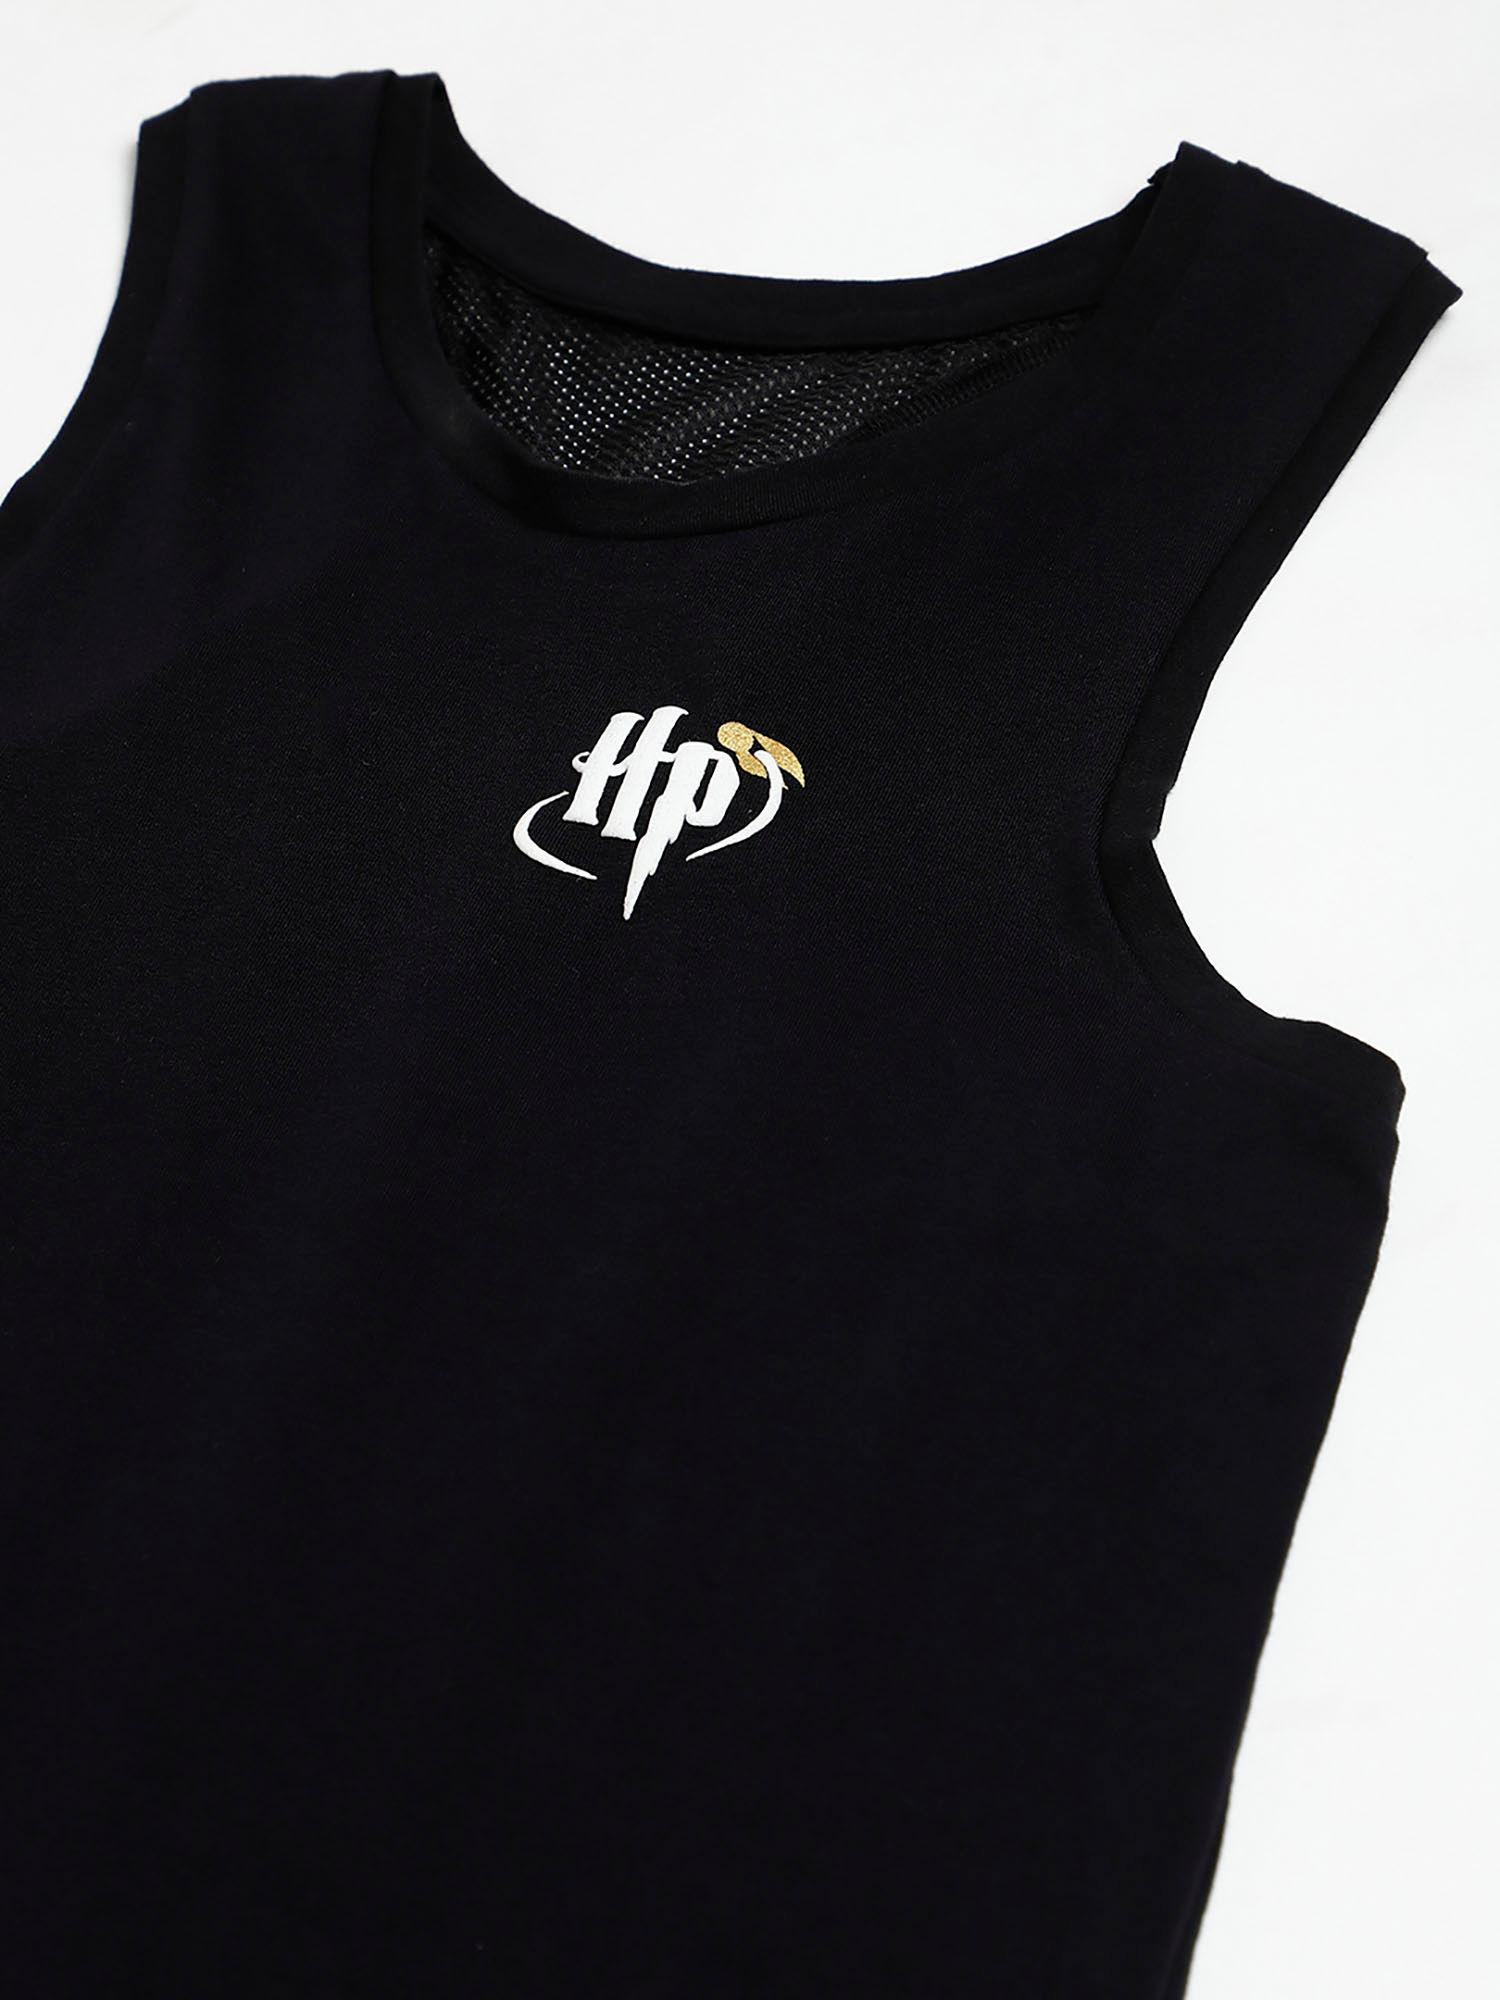 harry potter featured black tank top for women